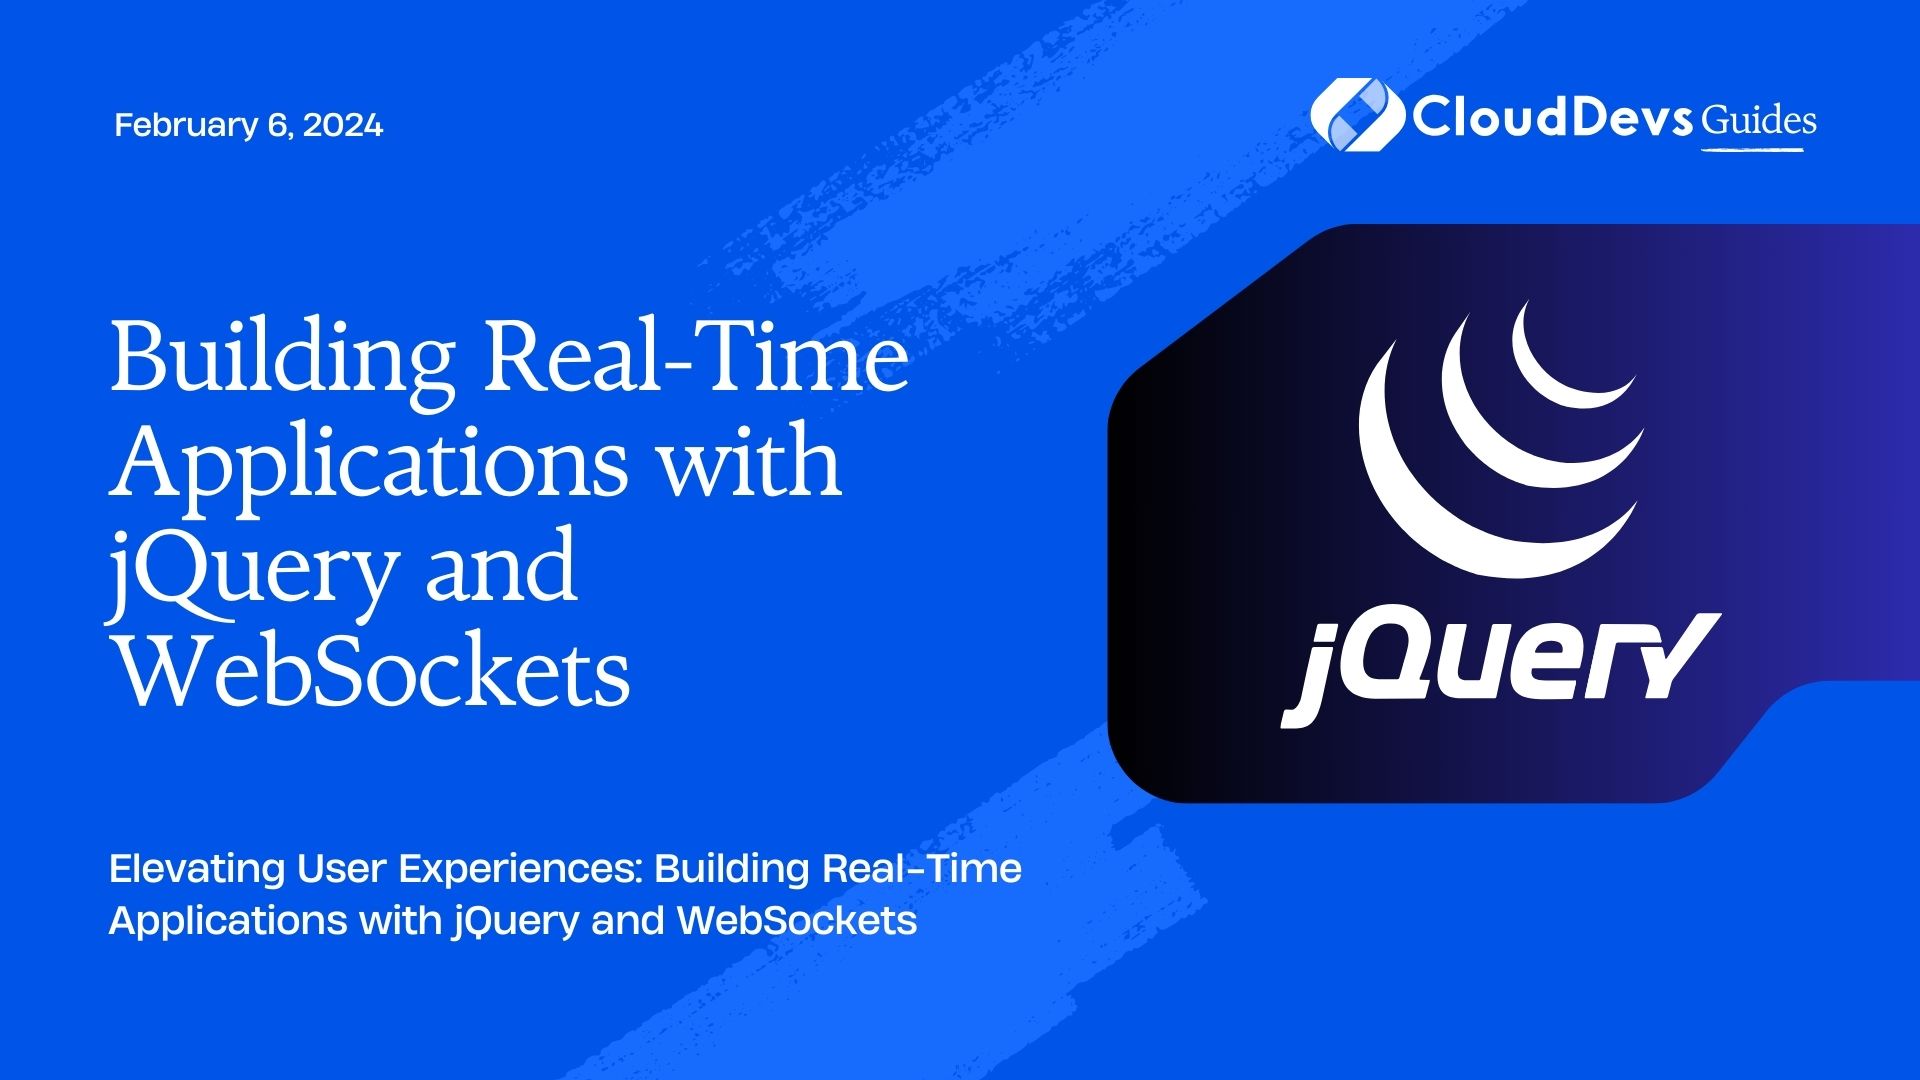 Building Real-Time Applications with jQuery and WebSockets